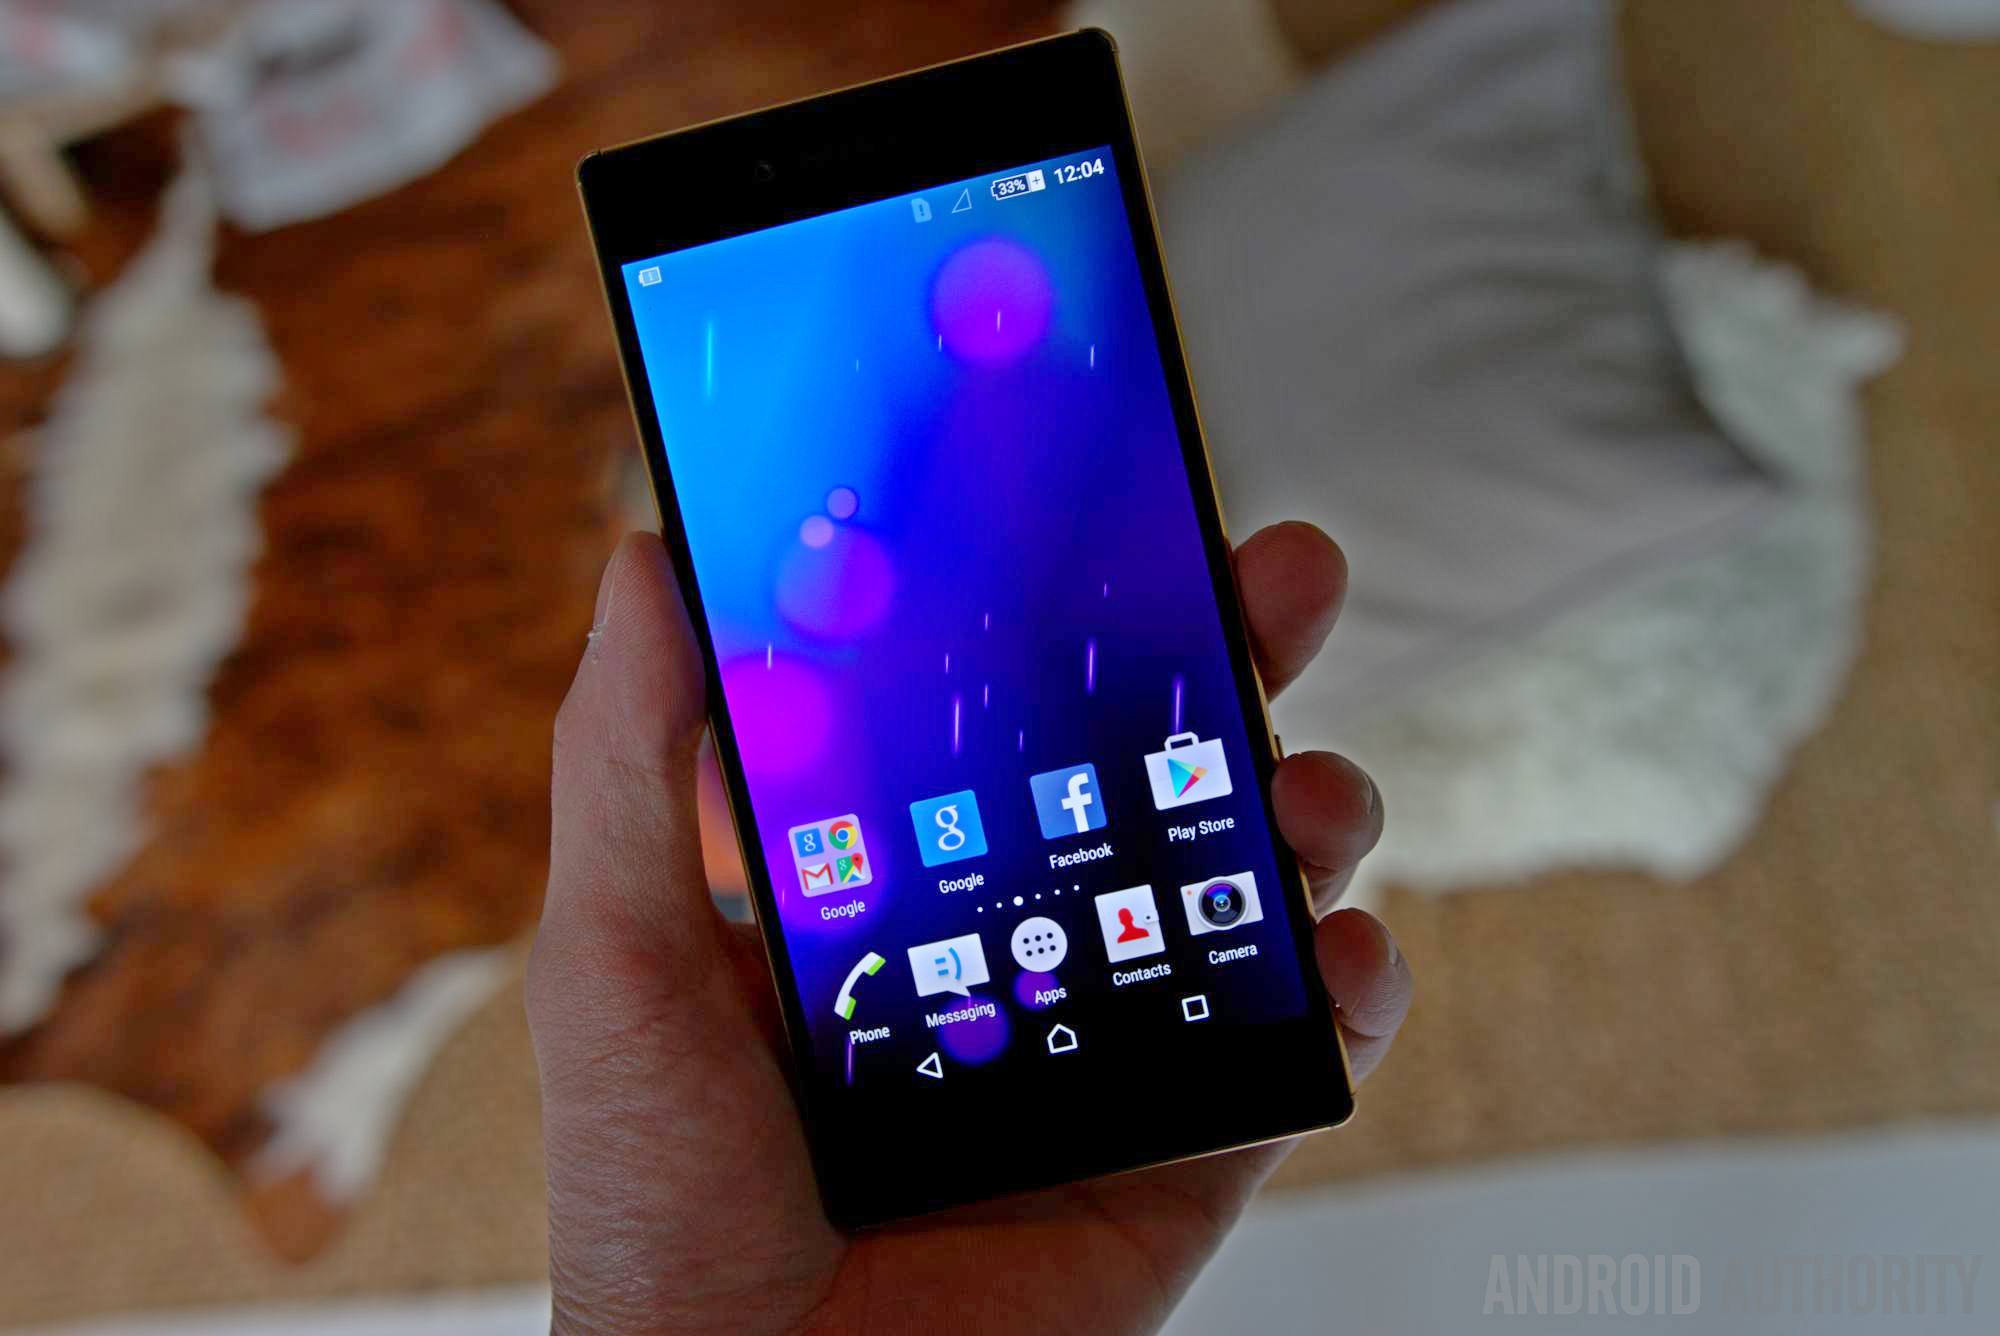 Menda City Klagen overhead Sony Xperia Z5 Premium hands-on and first look